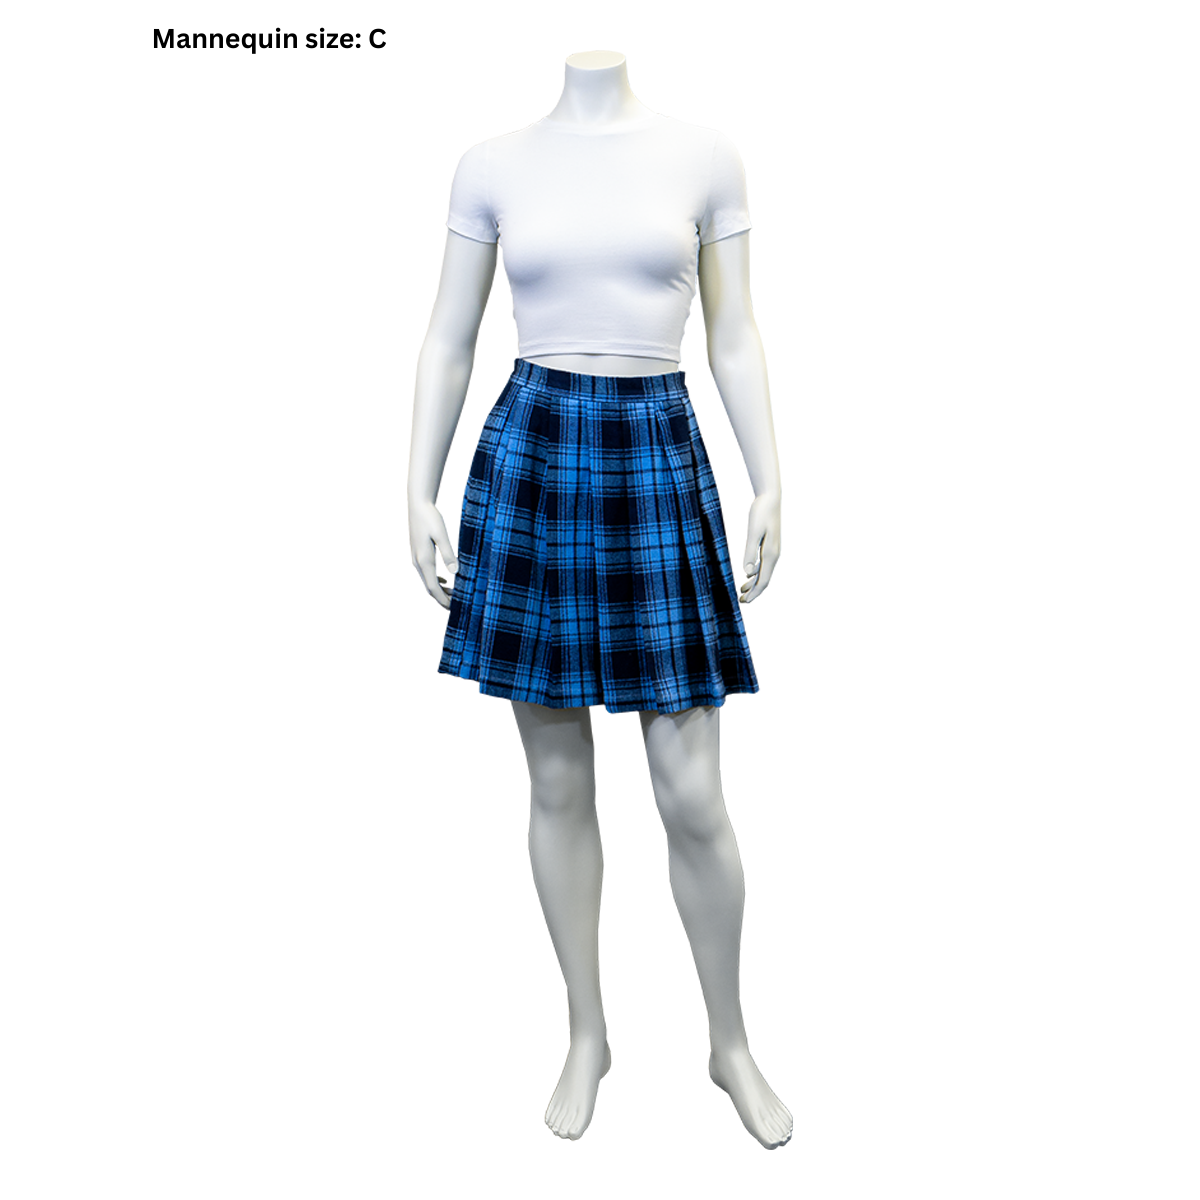 A photo of the front view of our female mannequin in the completed Pleated Skirt (size C).